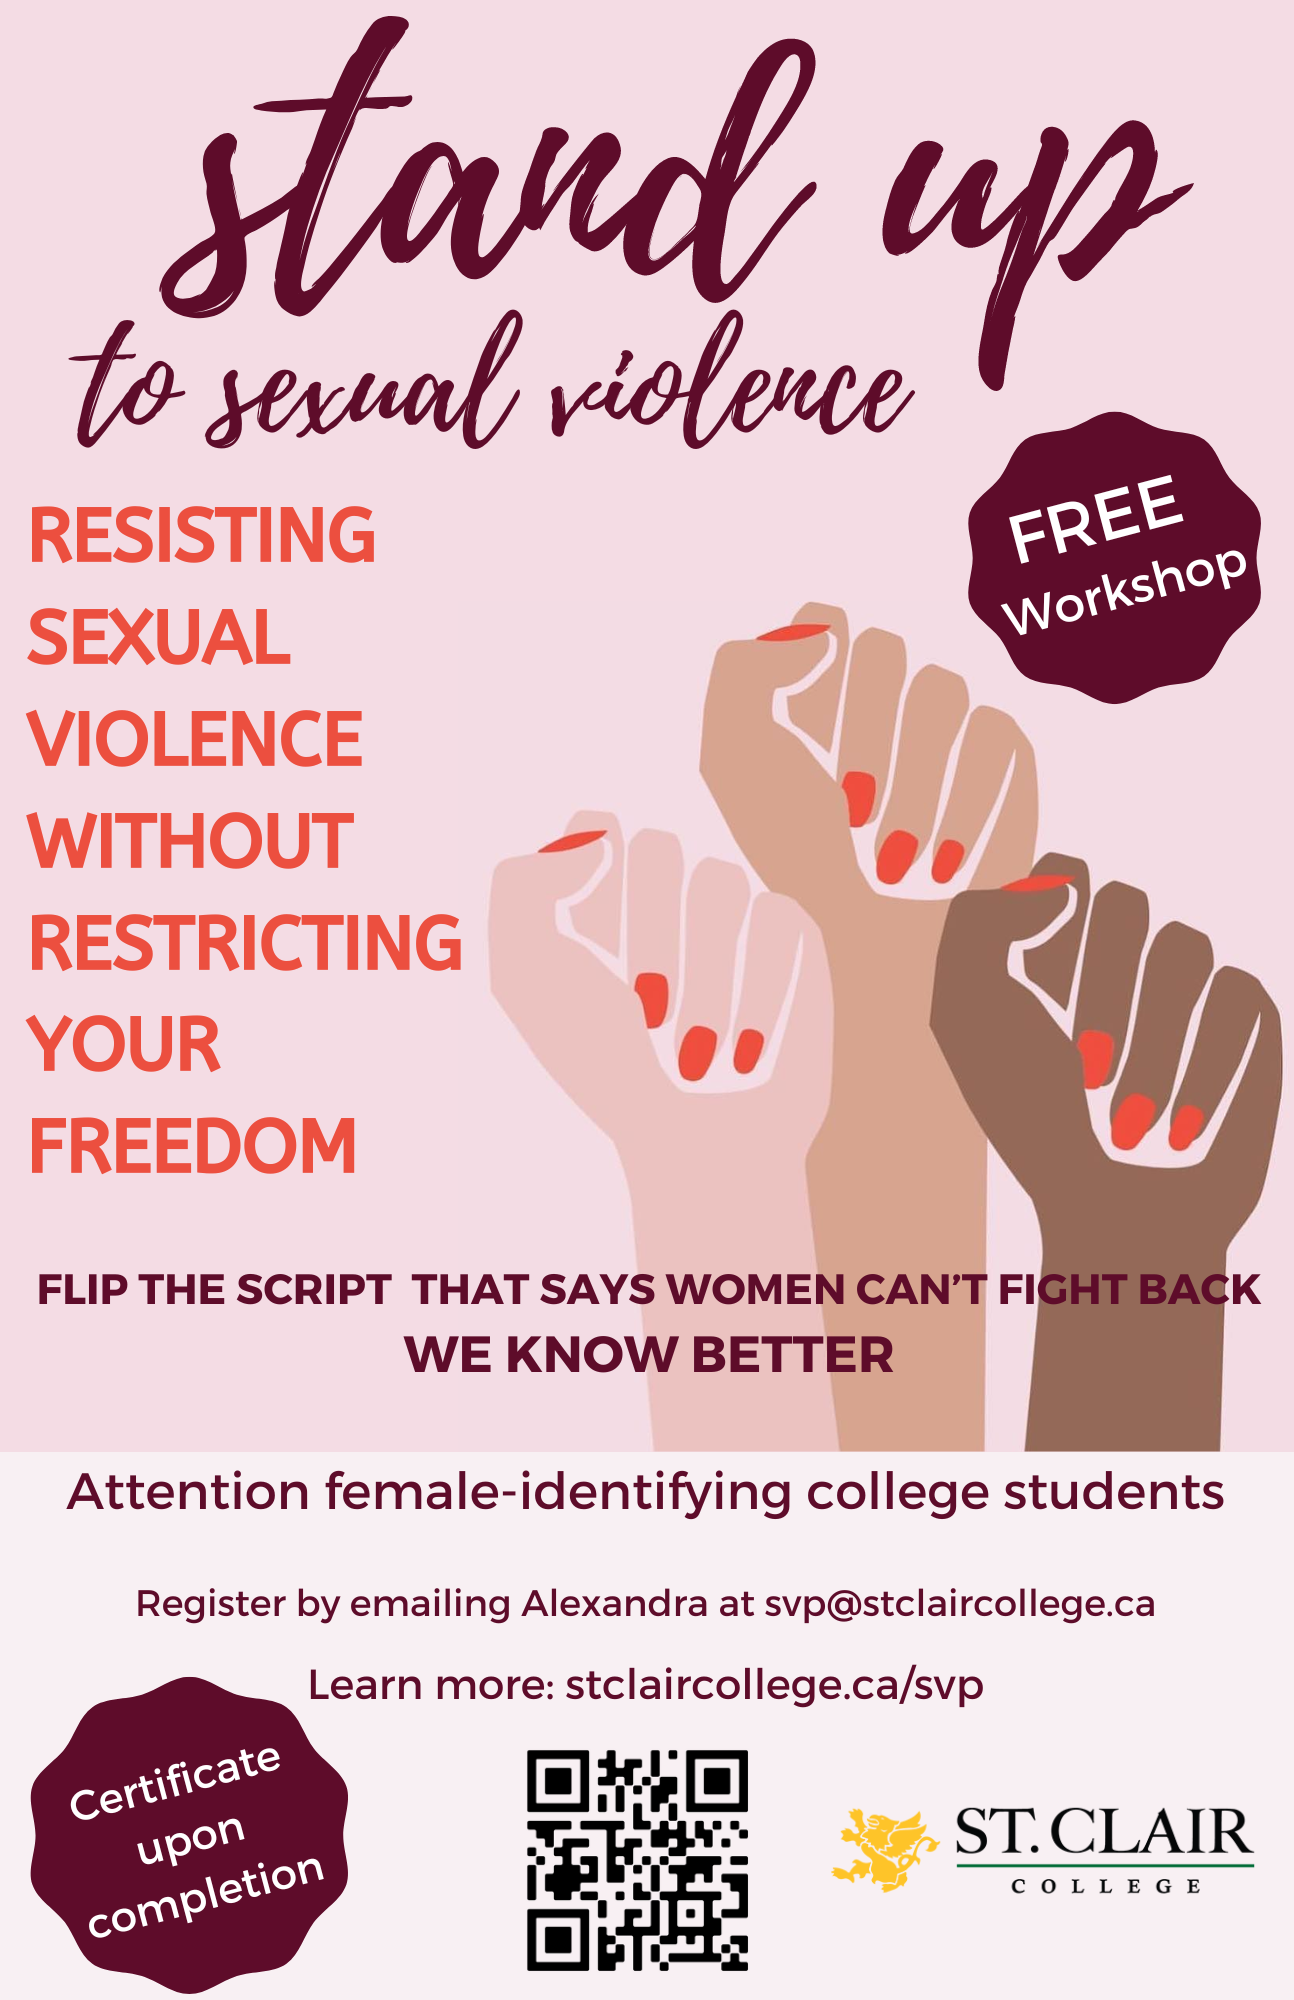 Stand up to sexual violence